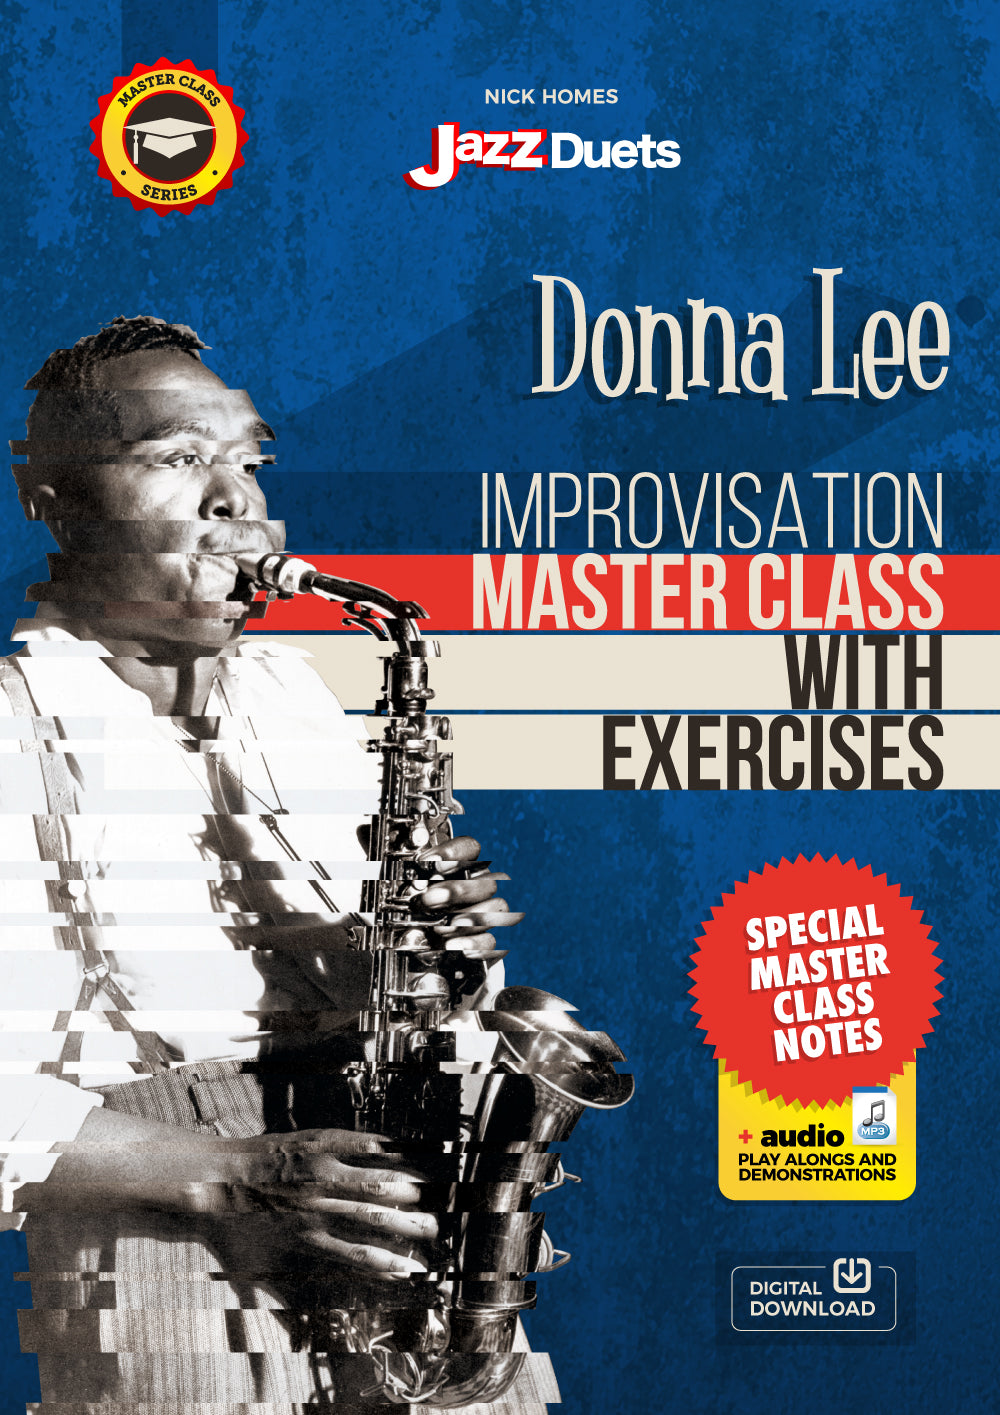 Donna Lee  IMPROVISATION Masterclass with exercises- digital download